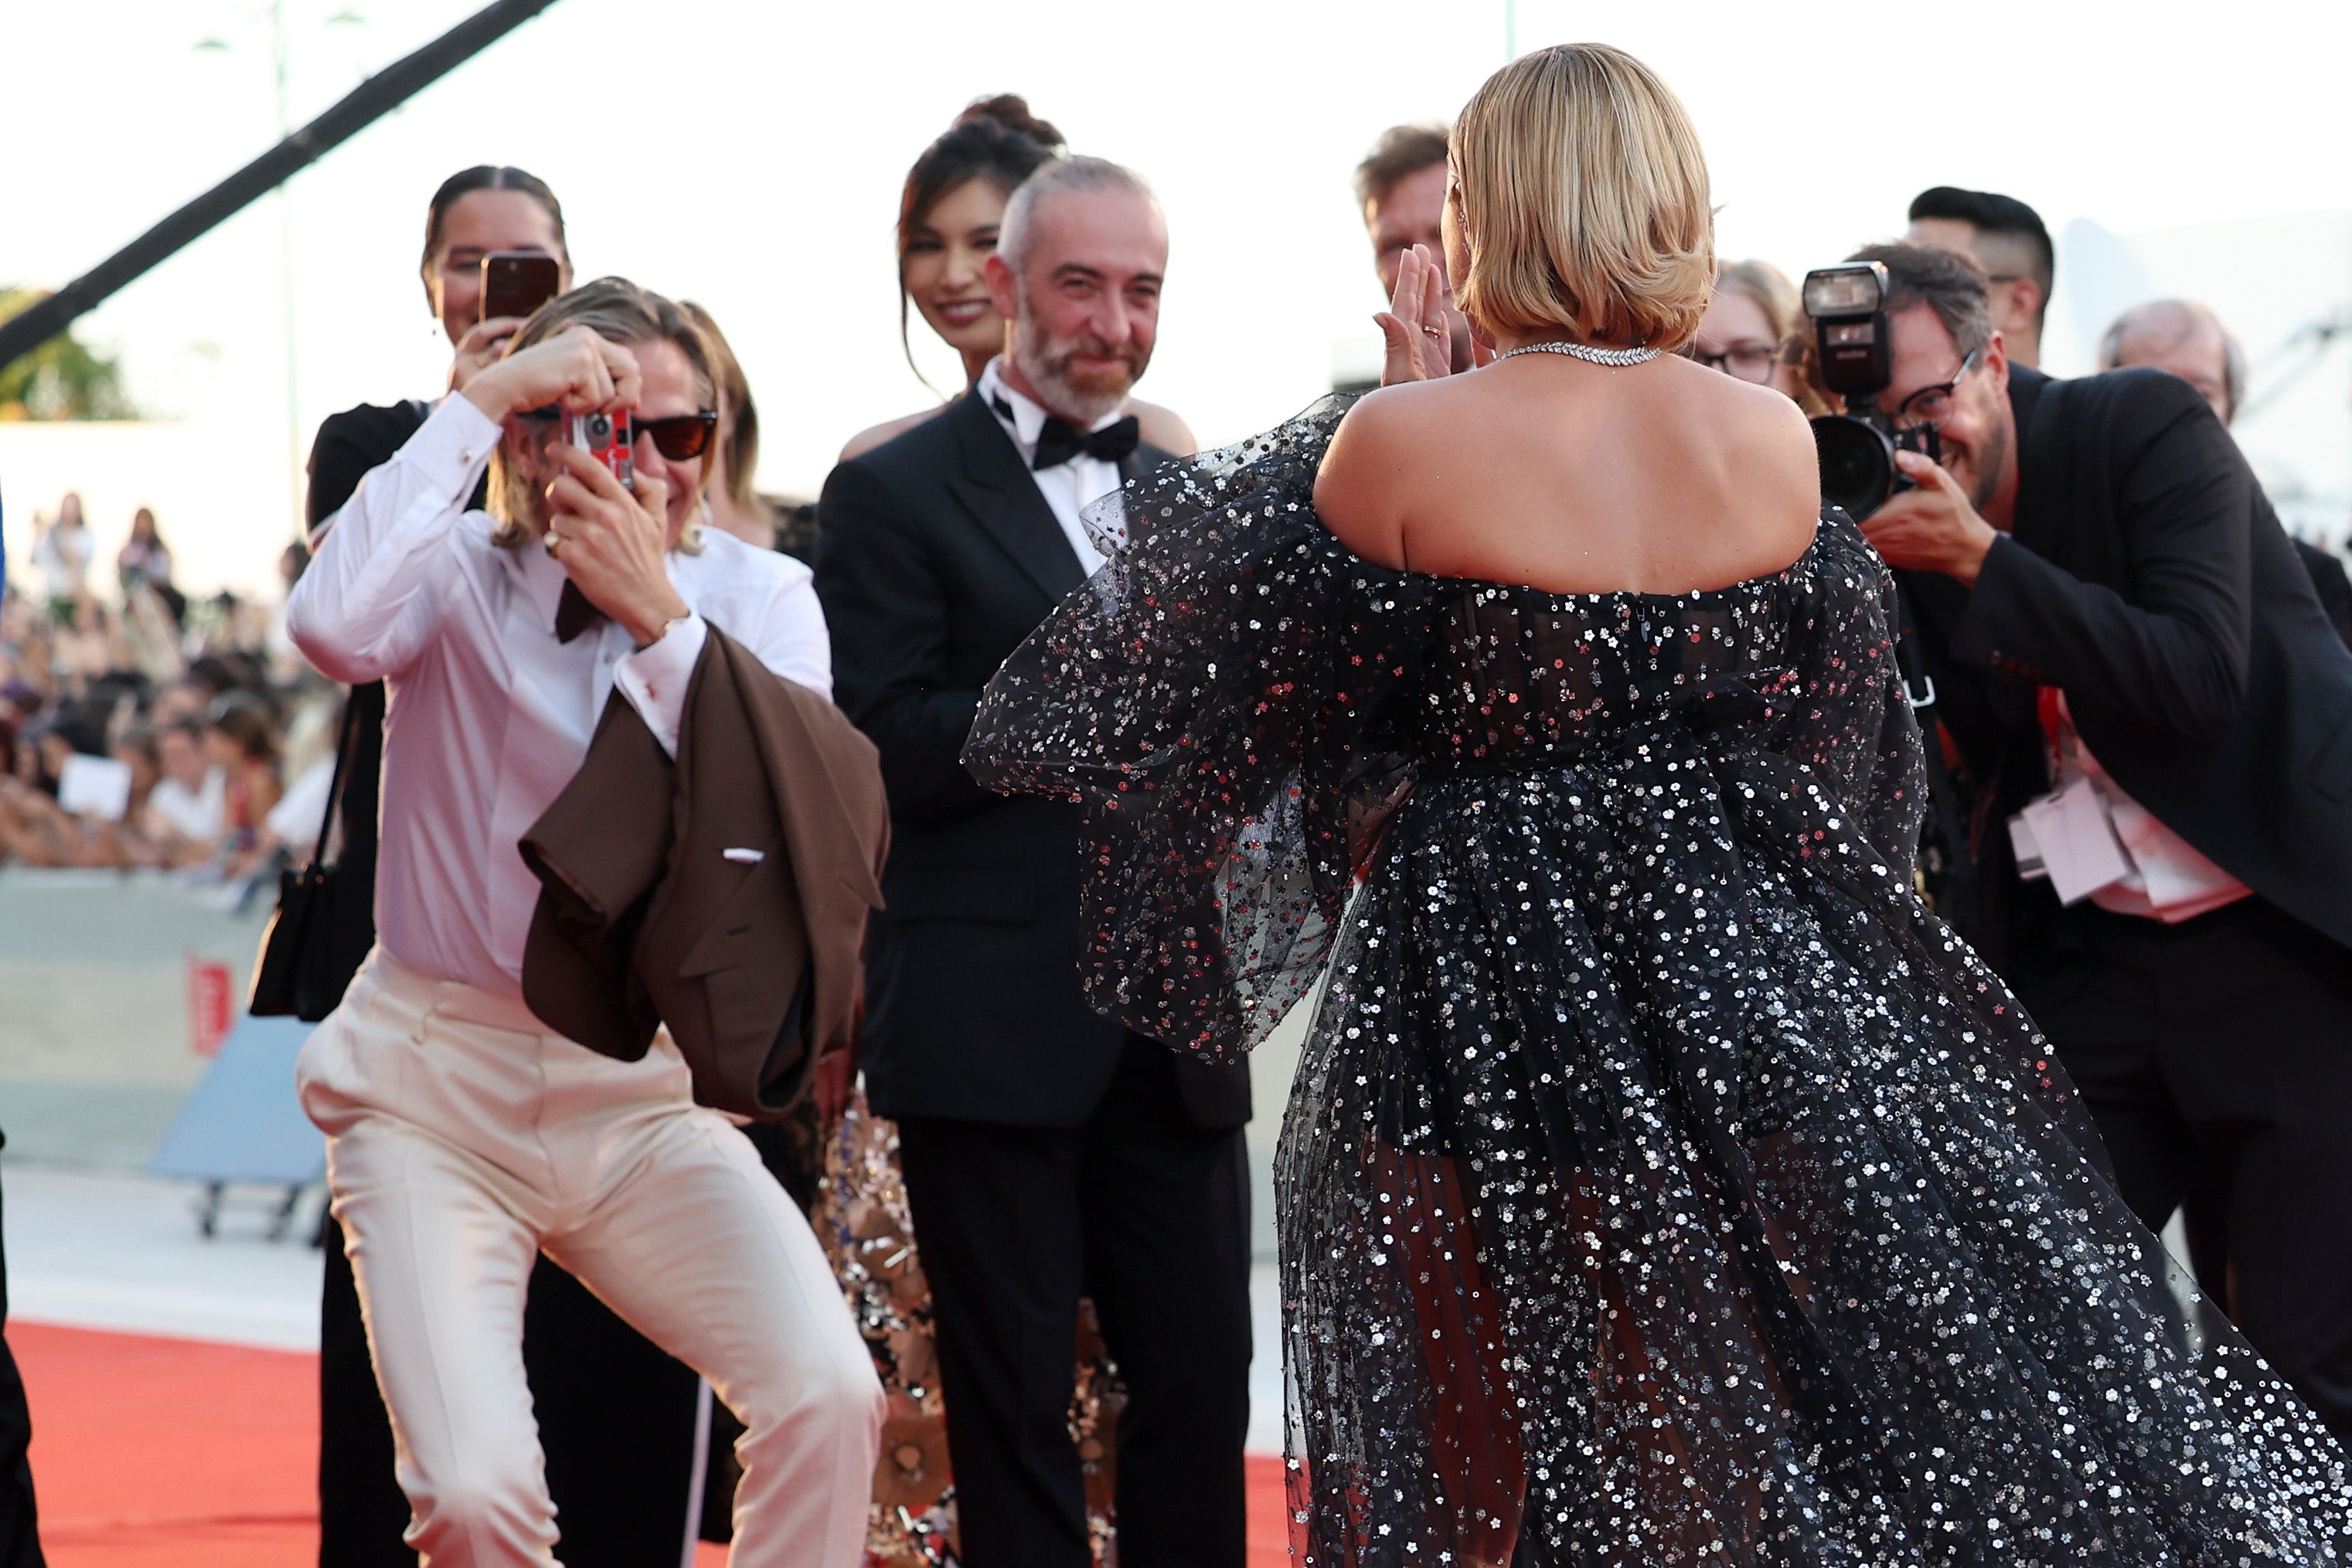 Chris Pine takes a picture of Florence Pugh on the red carpet at the premiere of ‘Don’t Worry, Darling’ at the 2022 Venice Film Festival